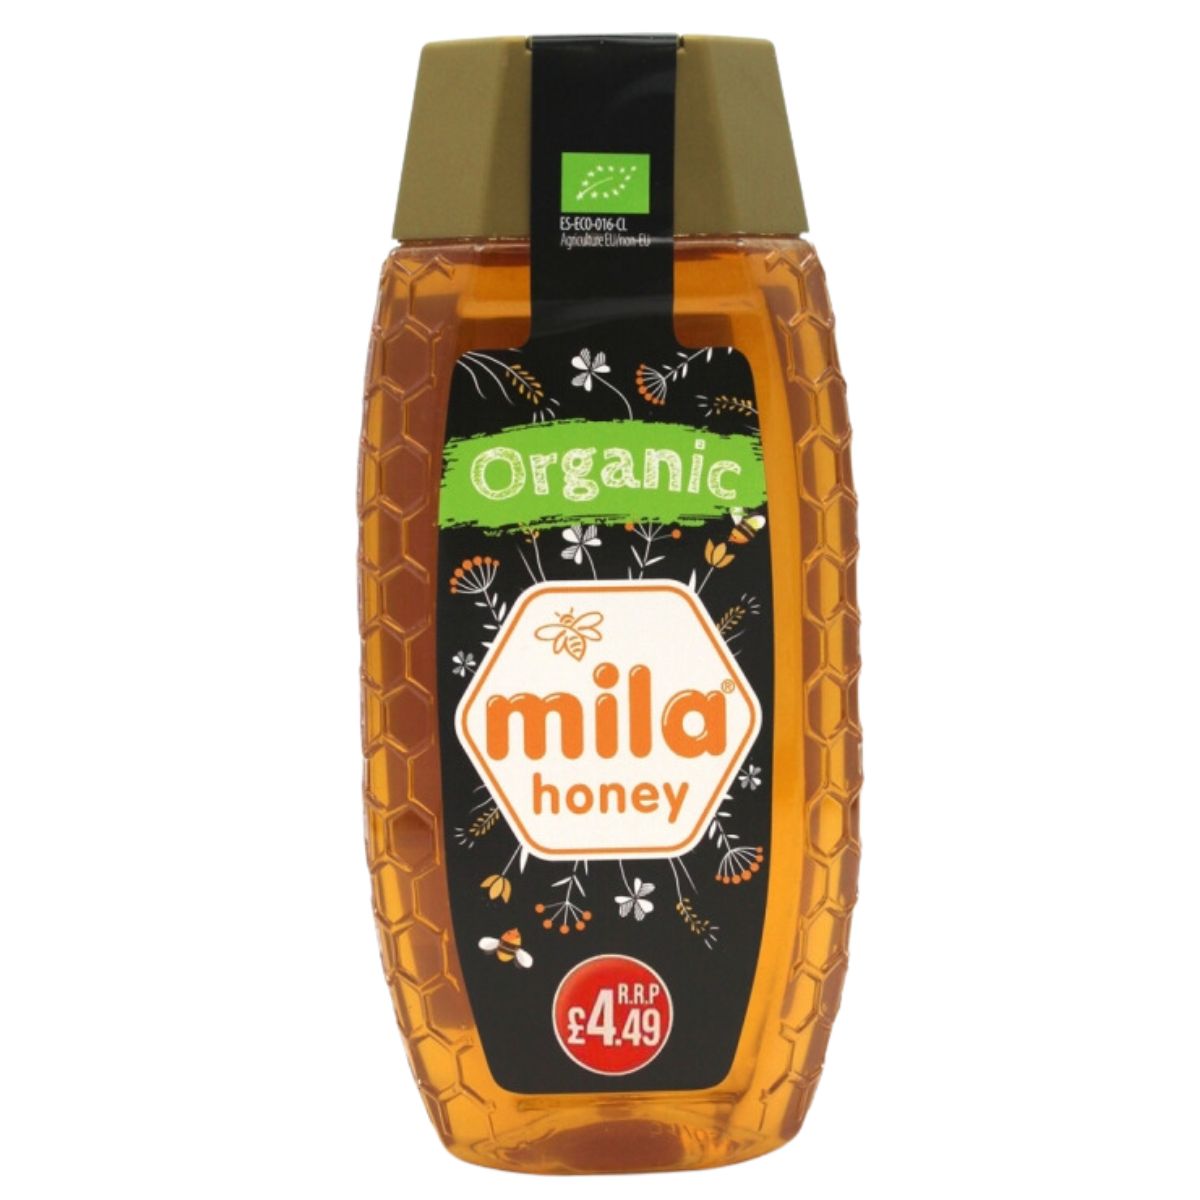 A Mila - Honey Organic Squeeze Bottle - 350g with a price tag of £4.49.